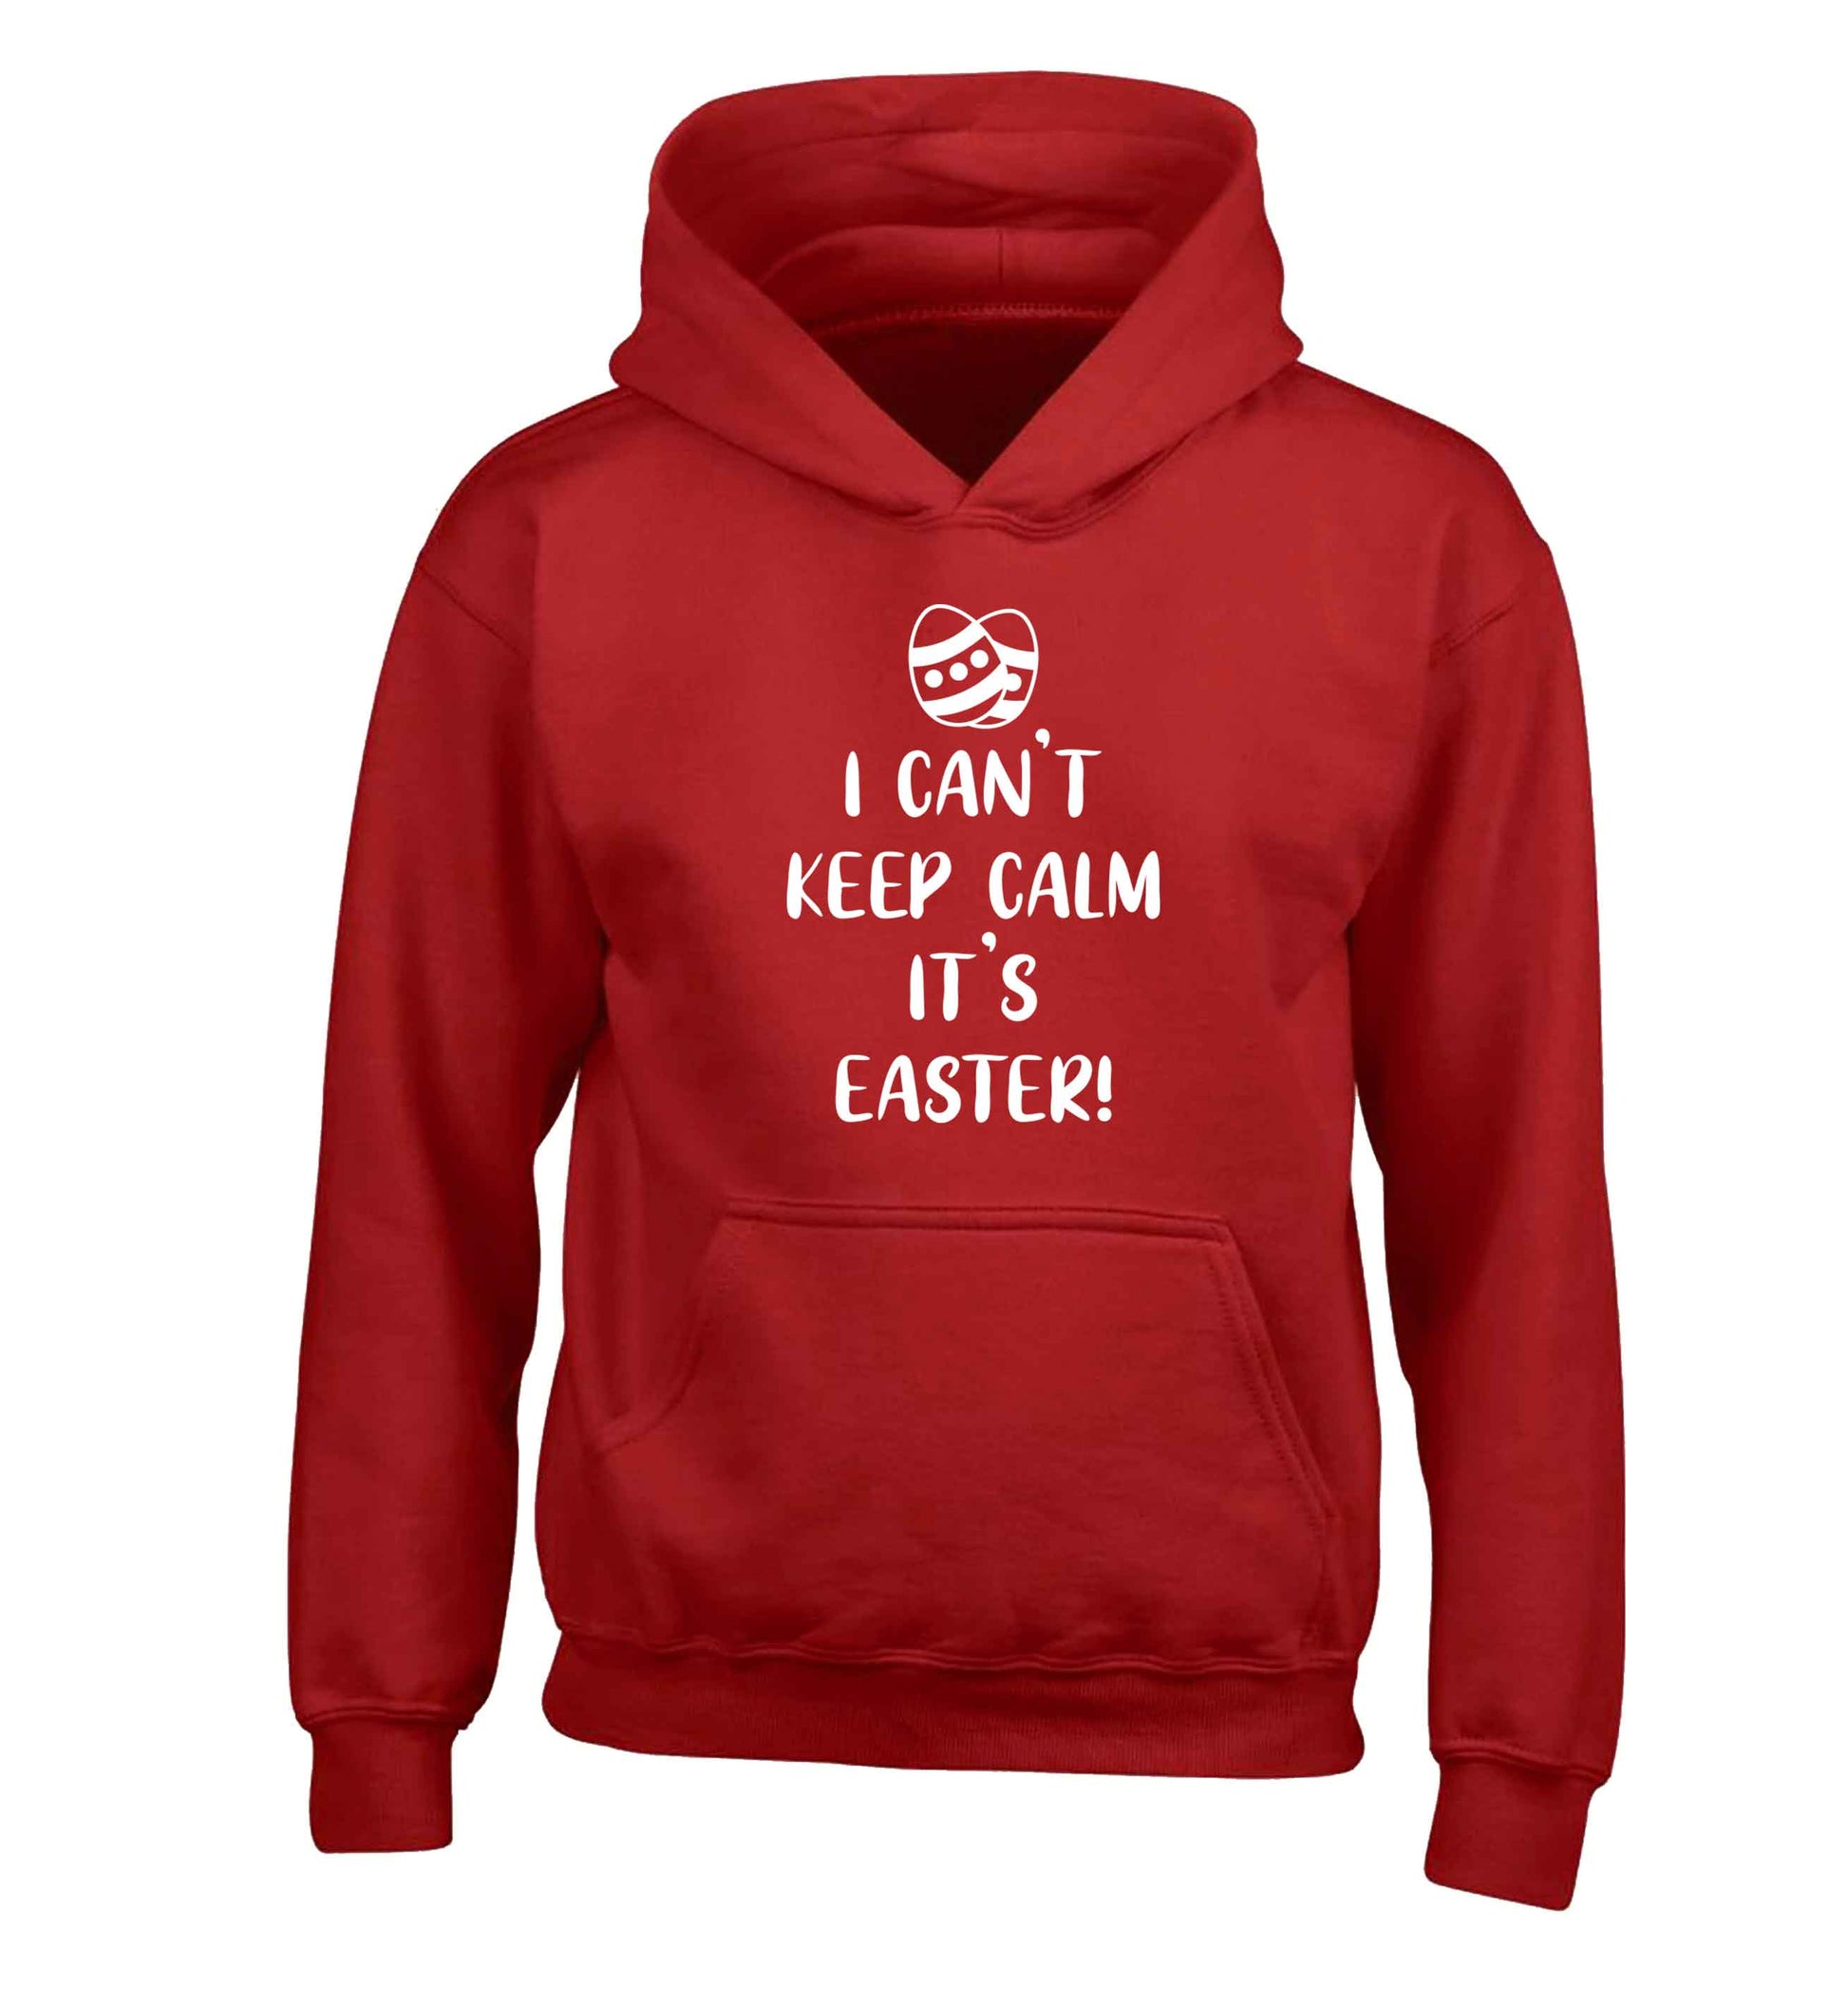 I can't keep calm it's Easter children's red hoodie 12-13 Years